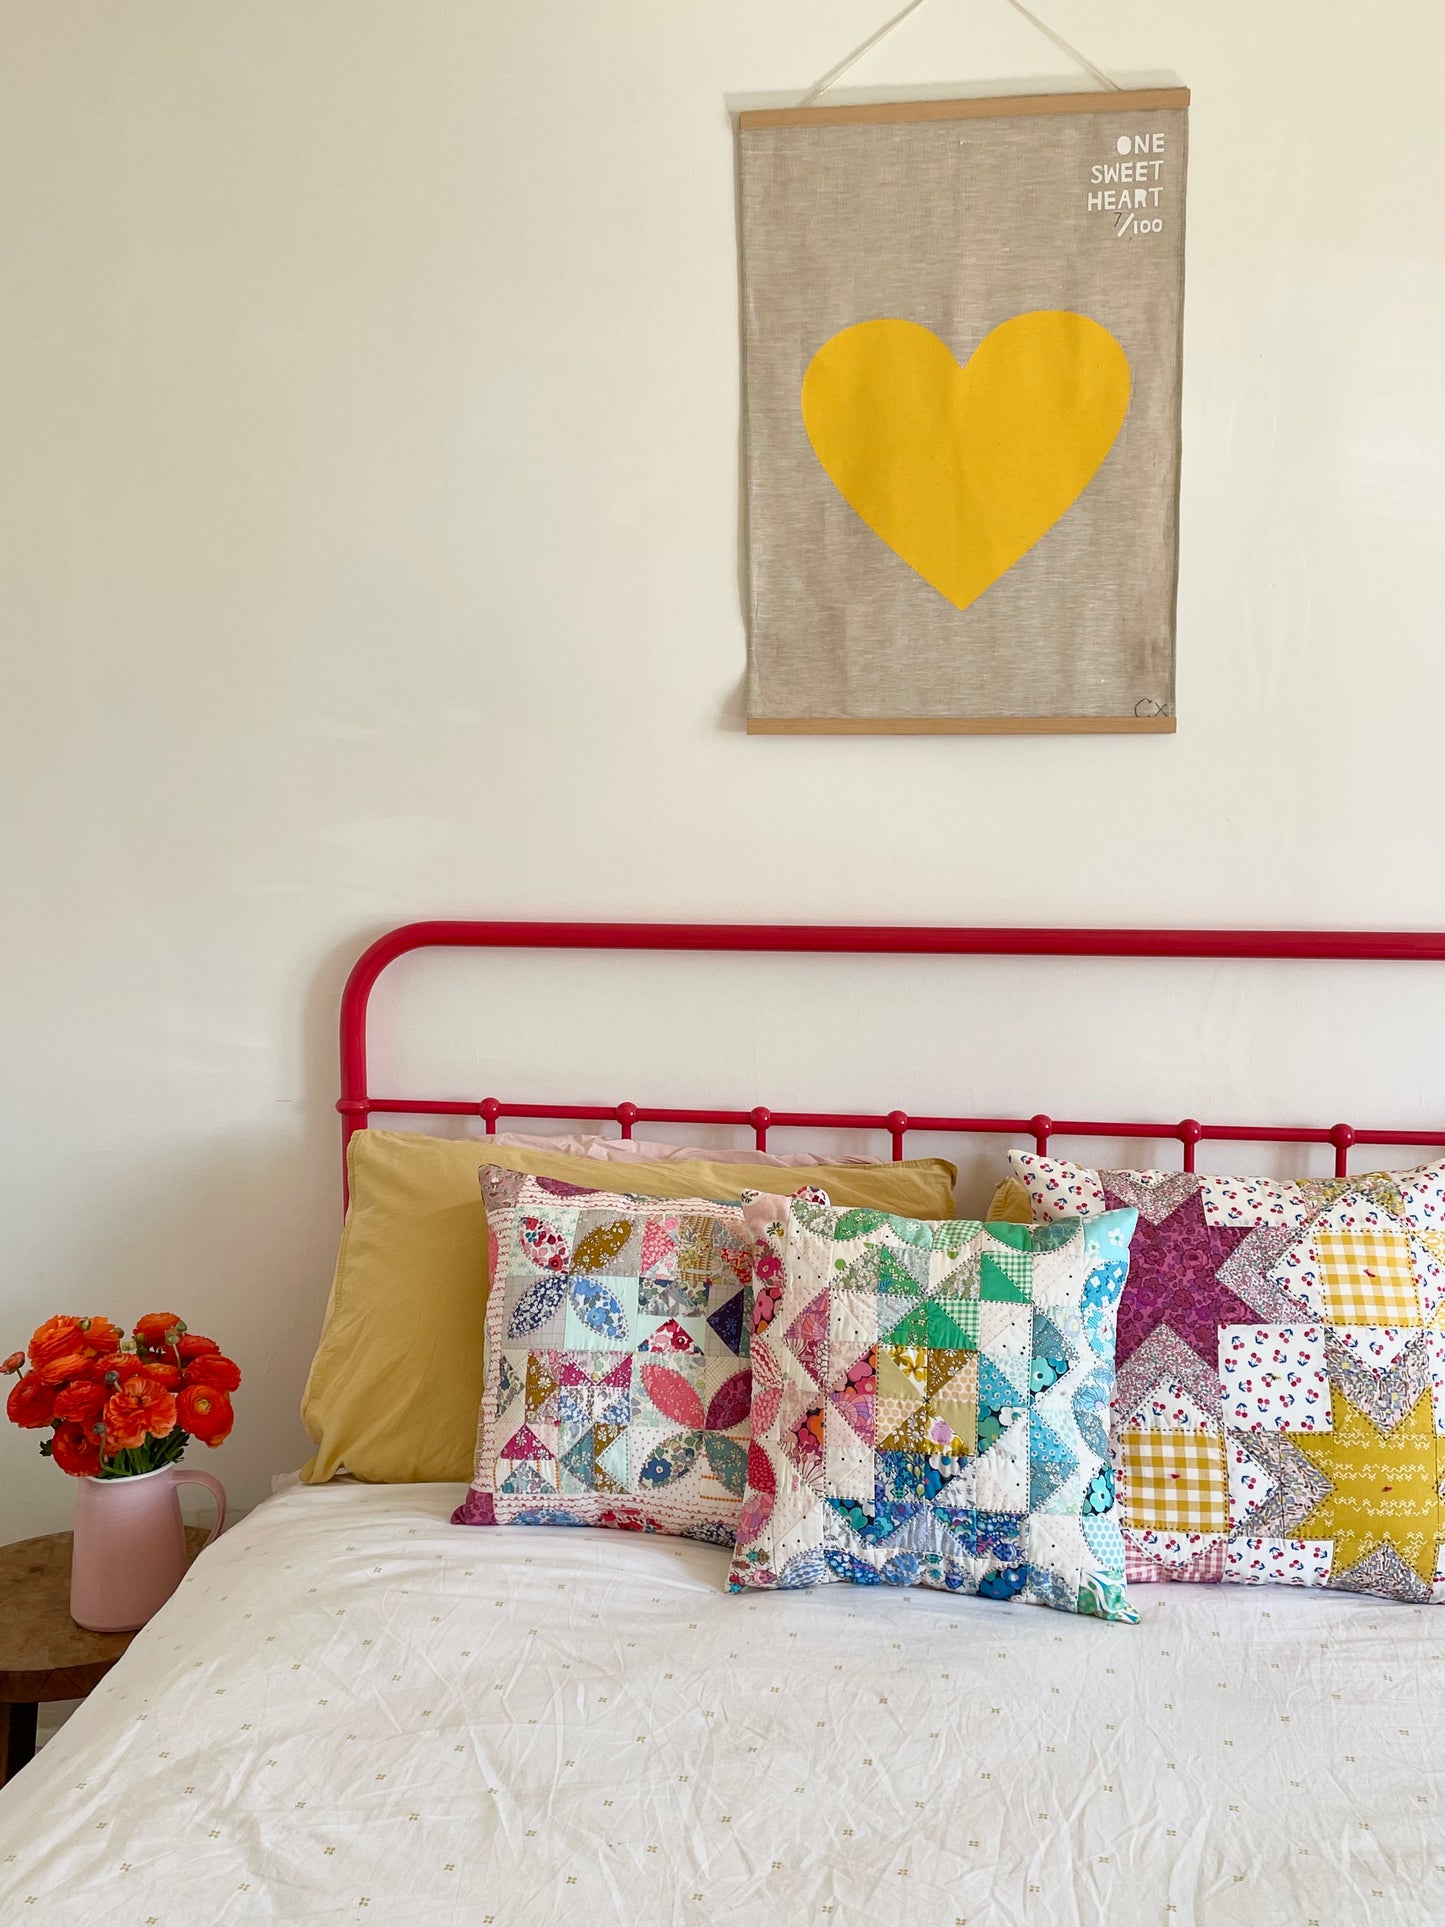 Happy Clappy! Three cushions to make you smile  (Digital Download - A4 PDF)